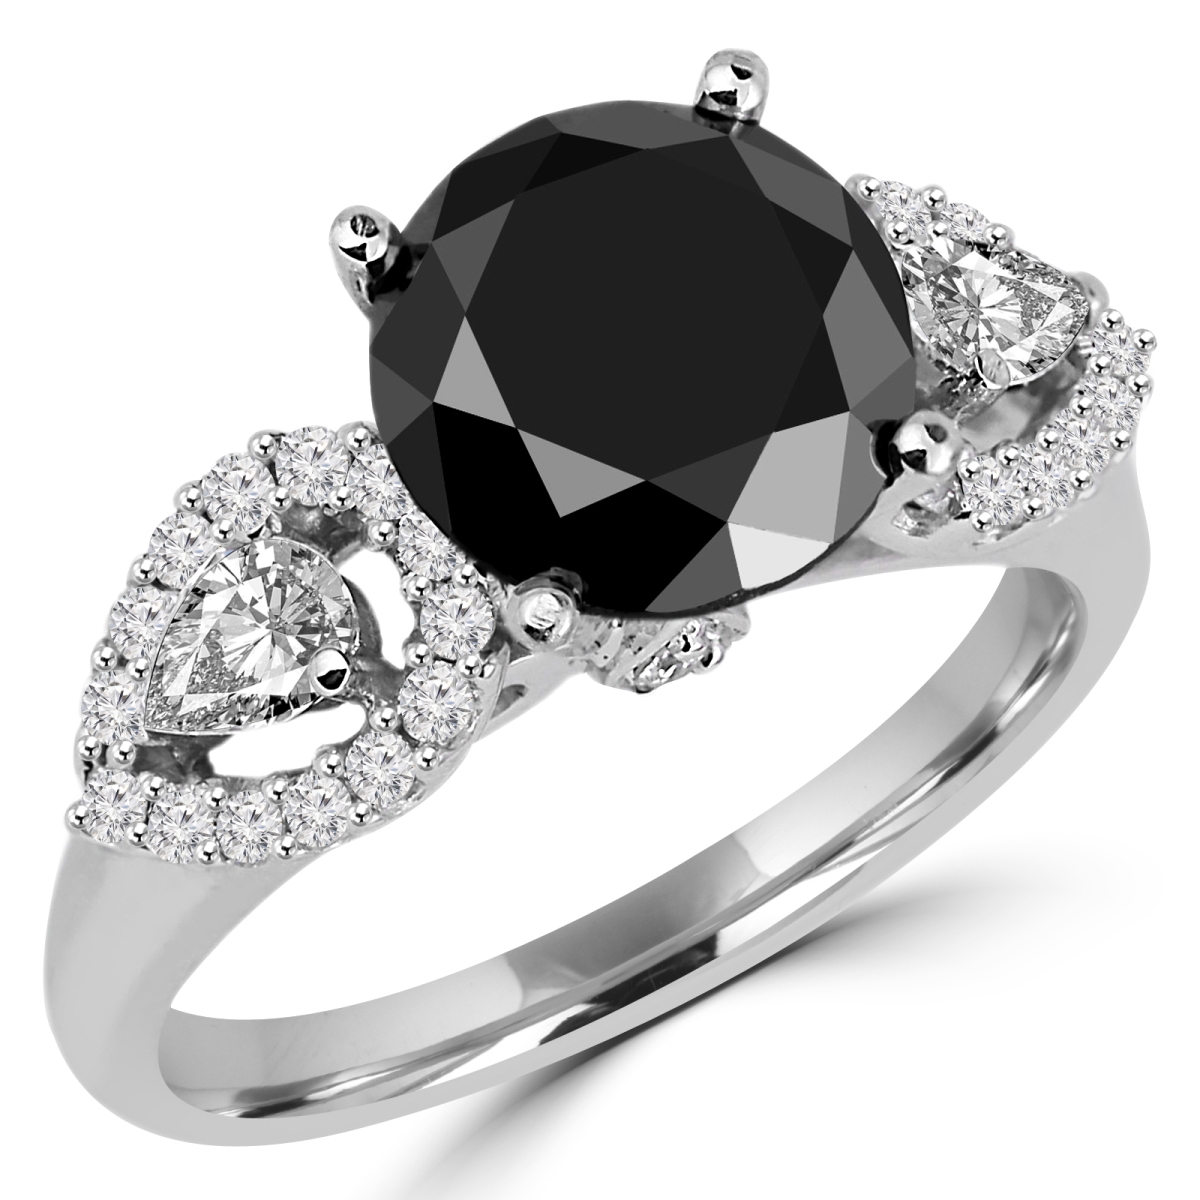 Picture of Majesty Diamonds MD180143-P 3.5 CTW Round Black Diamond Vintage Three-Stone Engagement Ring in 14K White Gold